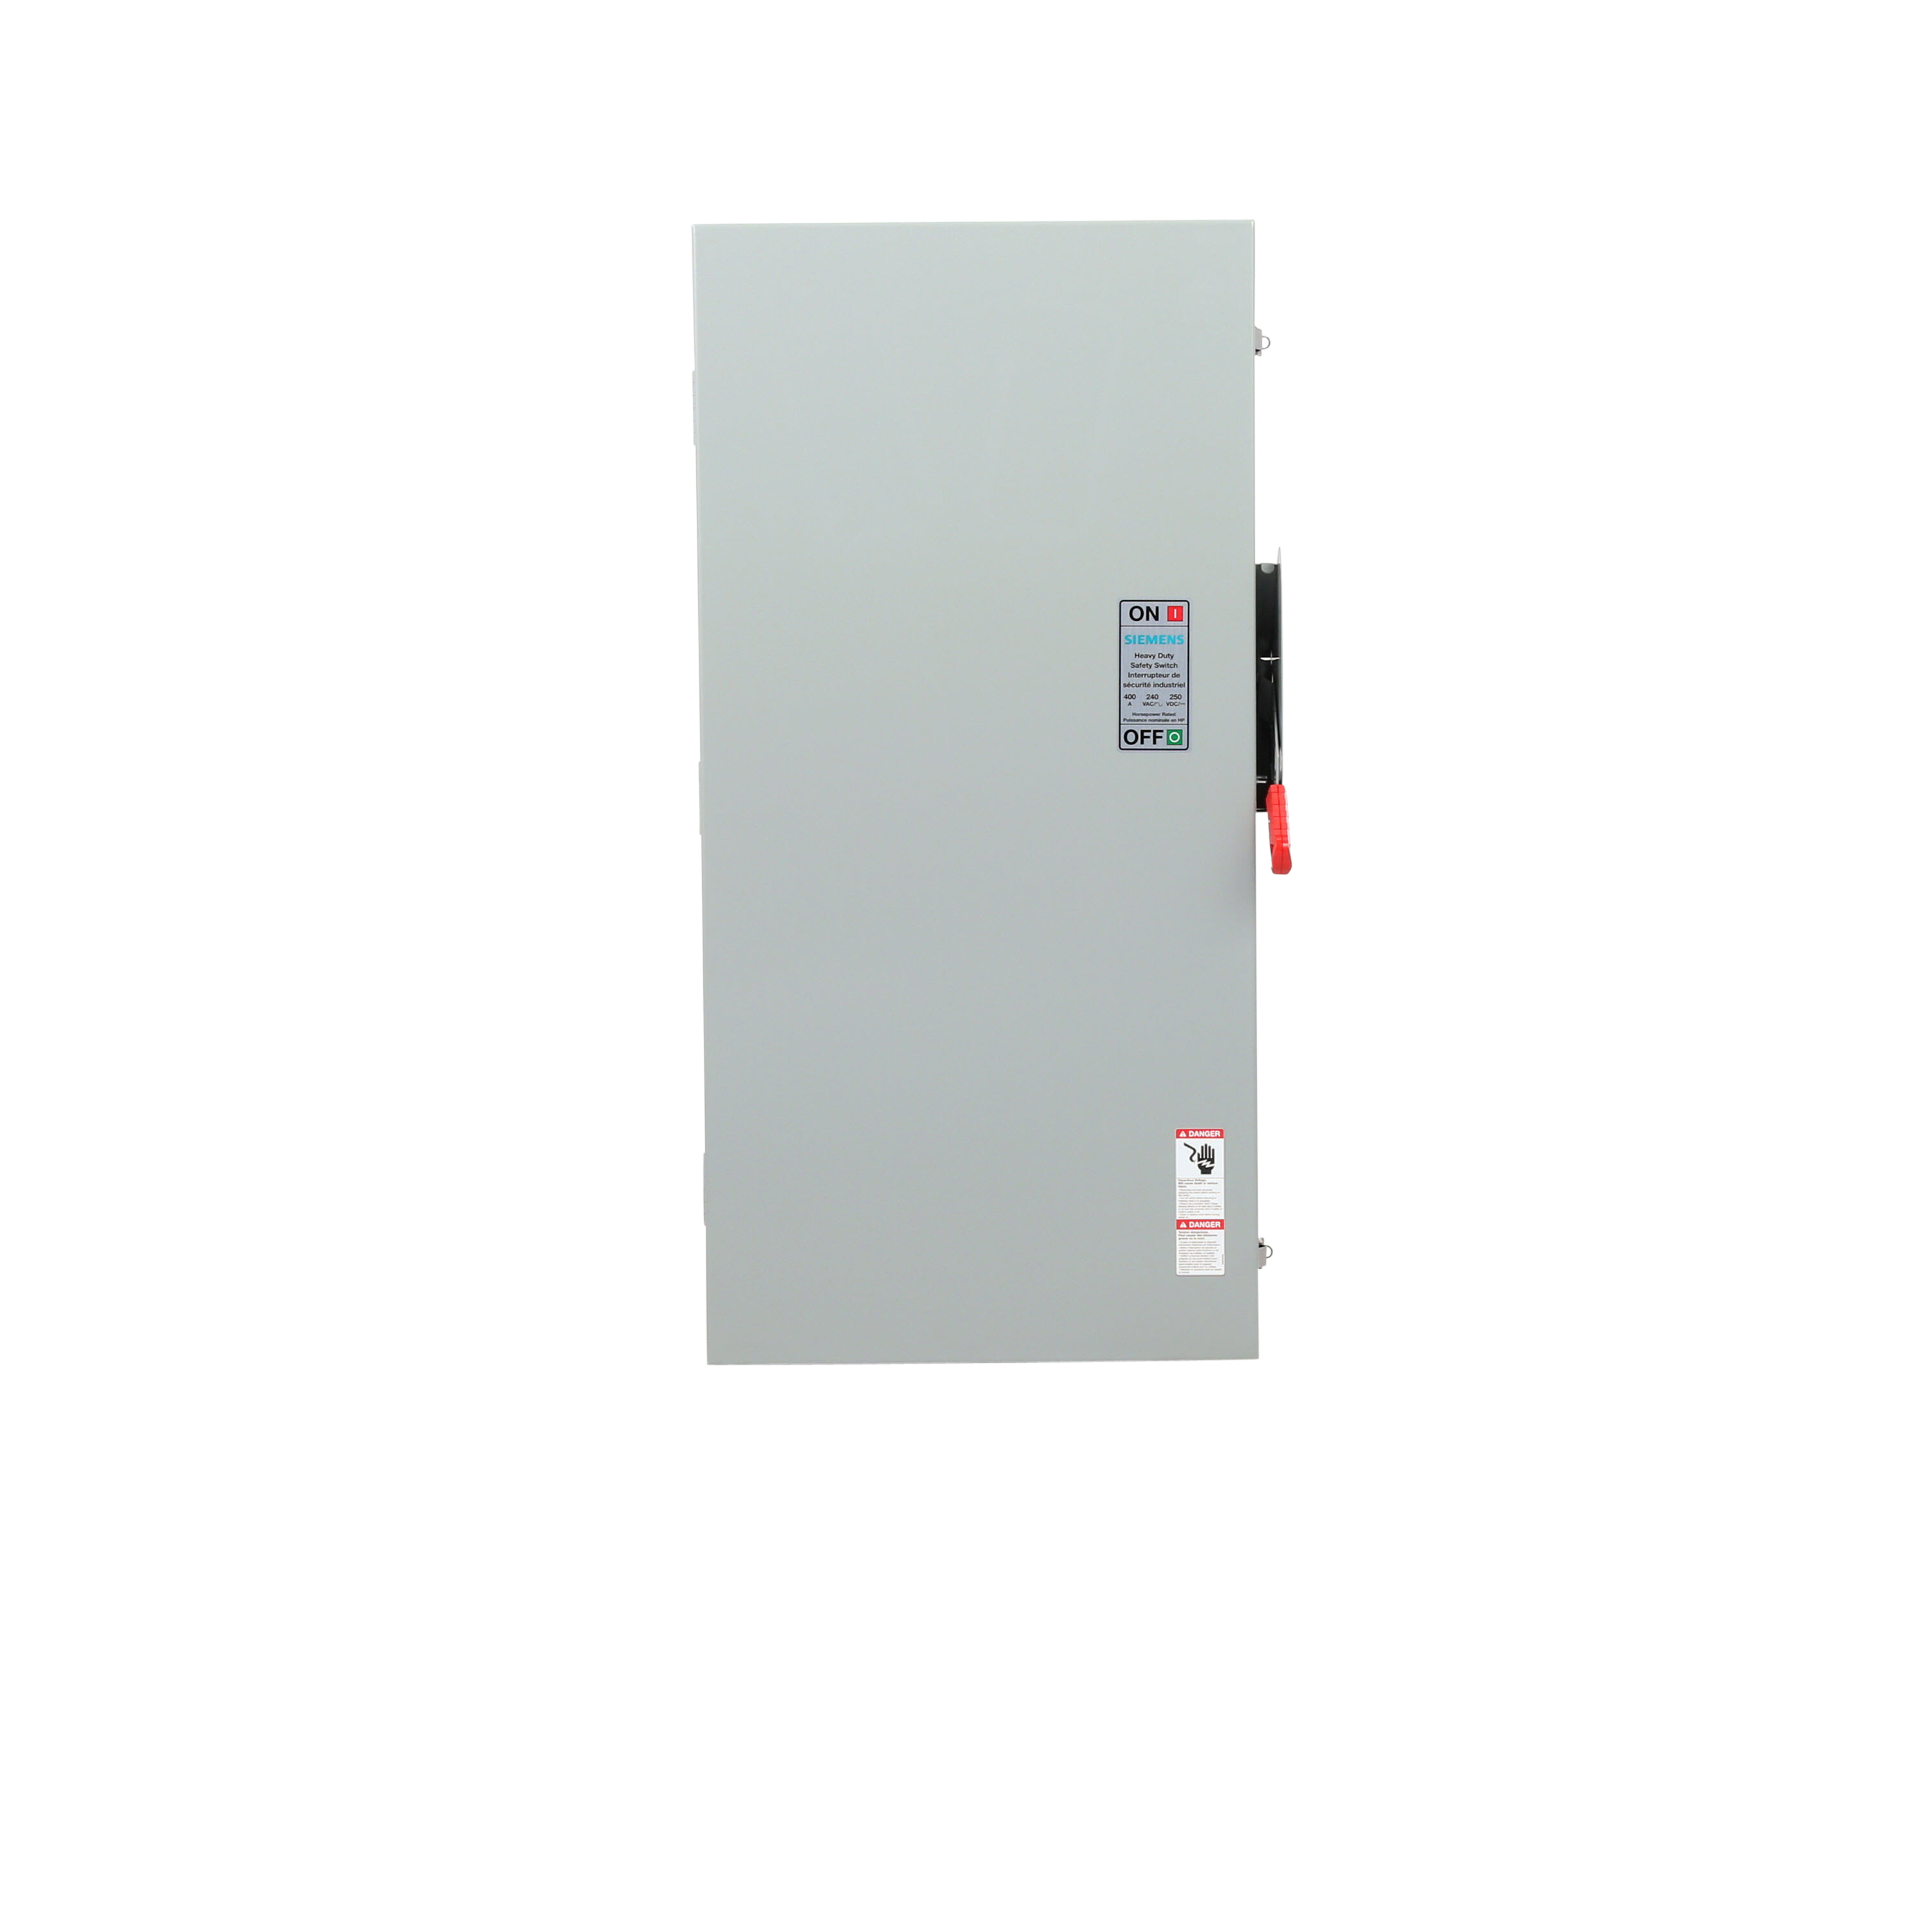 Siemens Low Voltage Circuit Protection Heavy Duty Safety Switch. 3-Pole 3-Fuse and solid neutral Fused in a type 3R enclosure (outdoor). Rated 240VAC (400A).